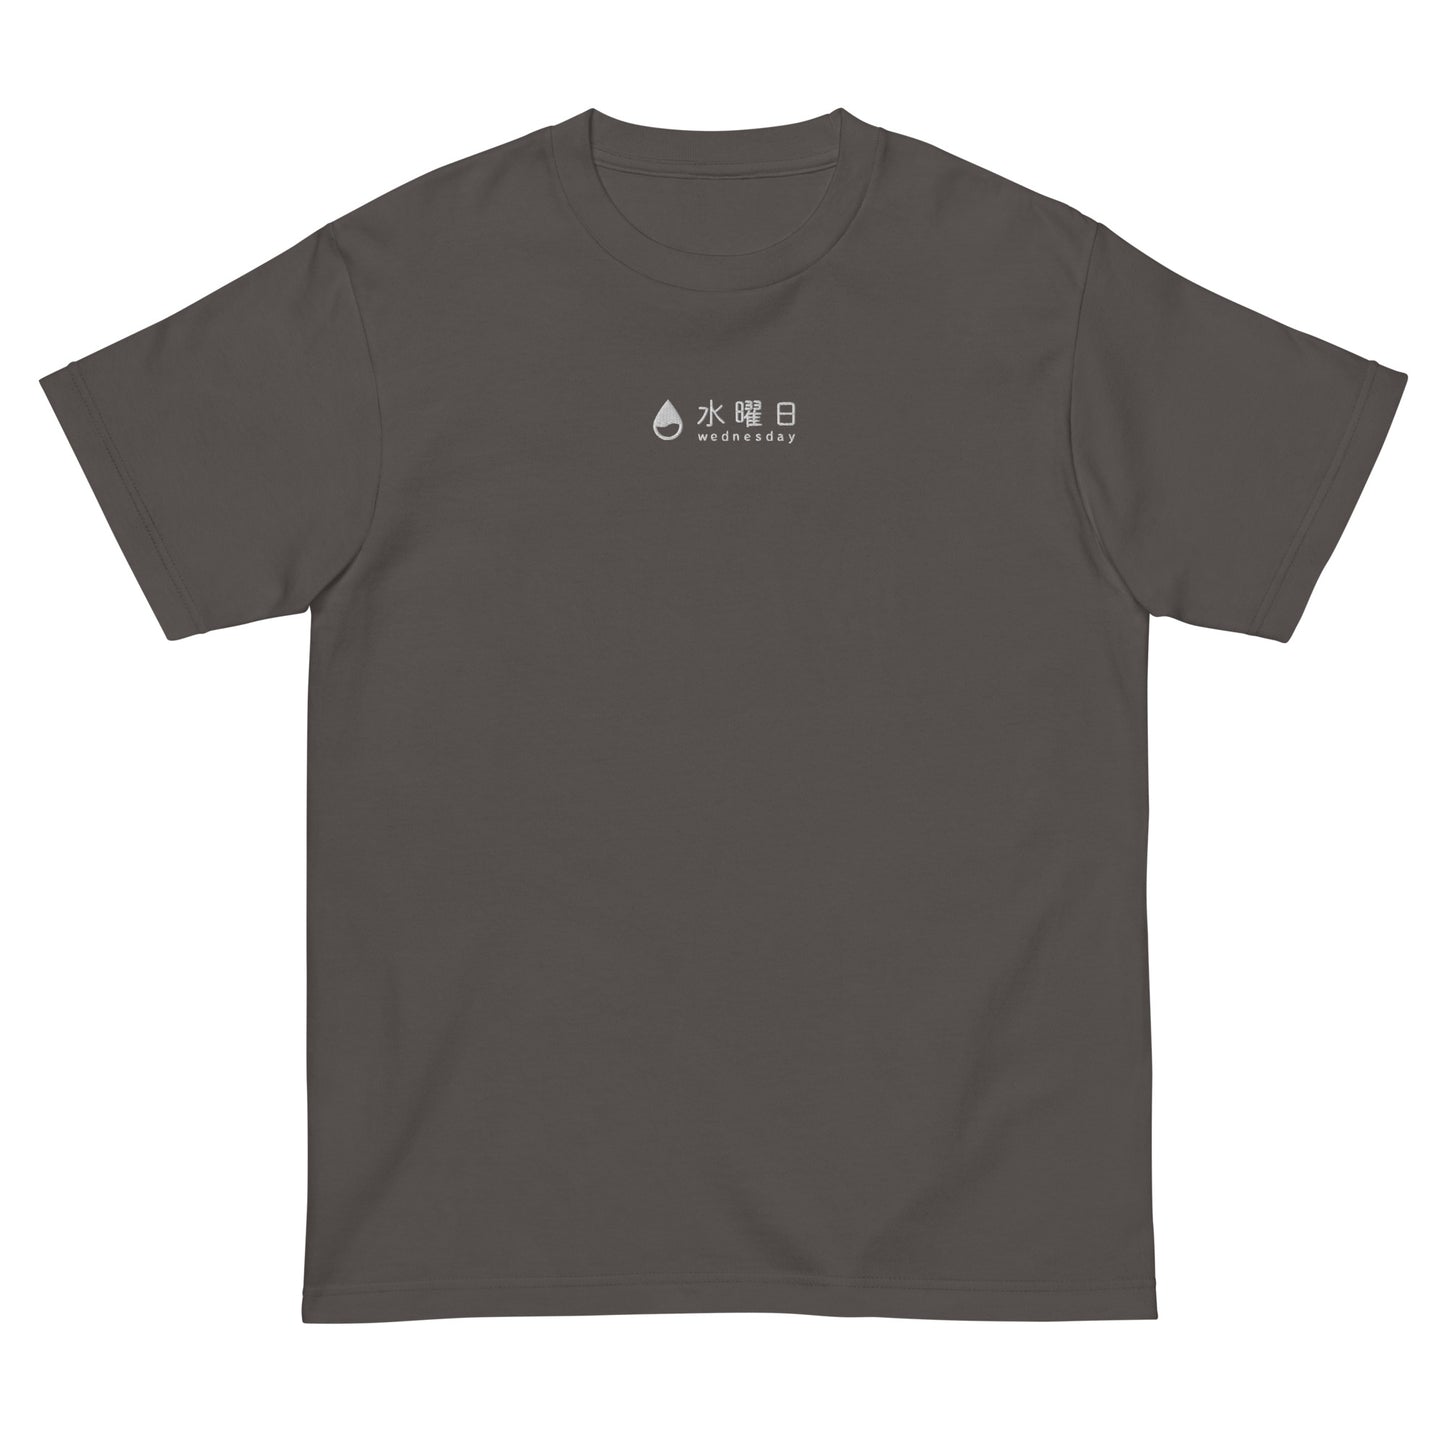 Charcoal Gray High Quality Tee - Front Design with an White Embroidery "Wednesday" in Japanese and English  Edit alt text